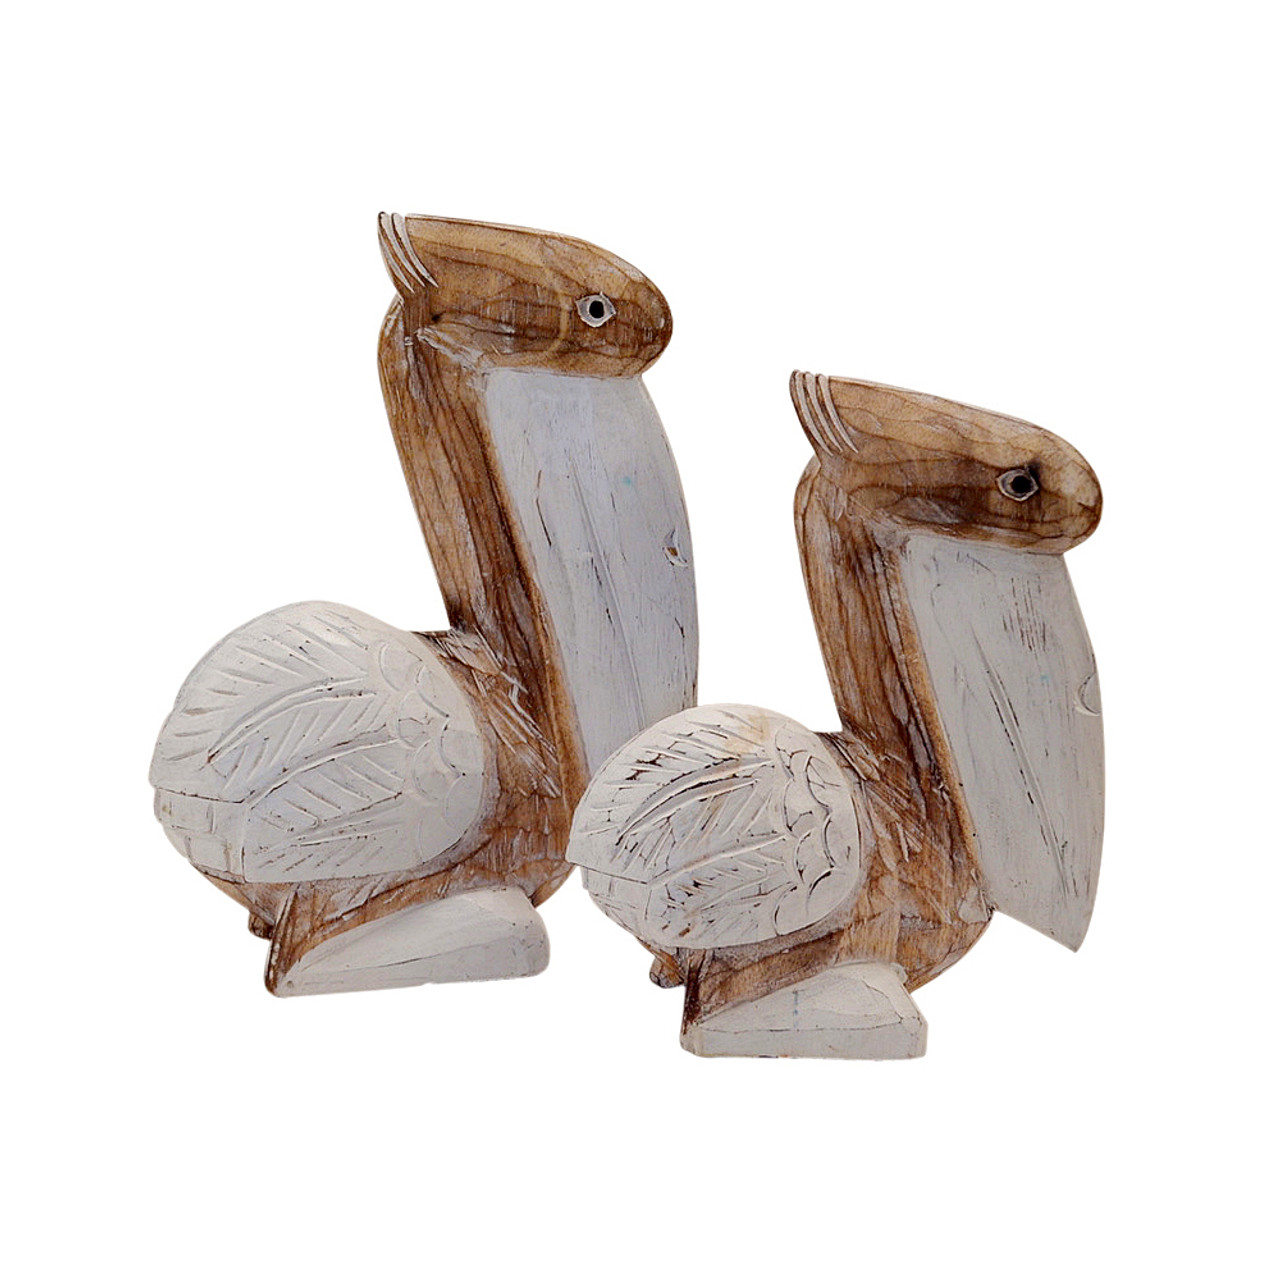 Hamptons Beach House Home Decor Seaside Sitting Wood Pelicans Set of 2 Home Decoration Ornament white wash
Wood carved
White wash
L 30 x 23cm M 25 x 20 ,